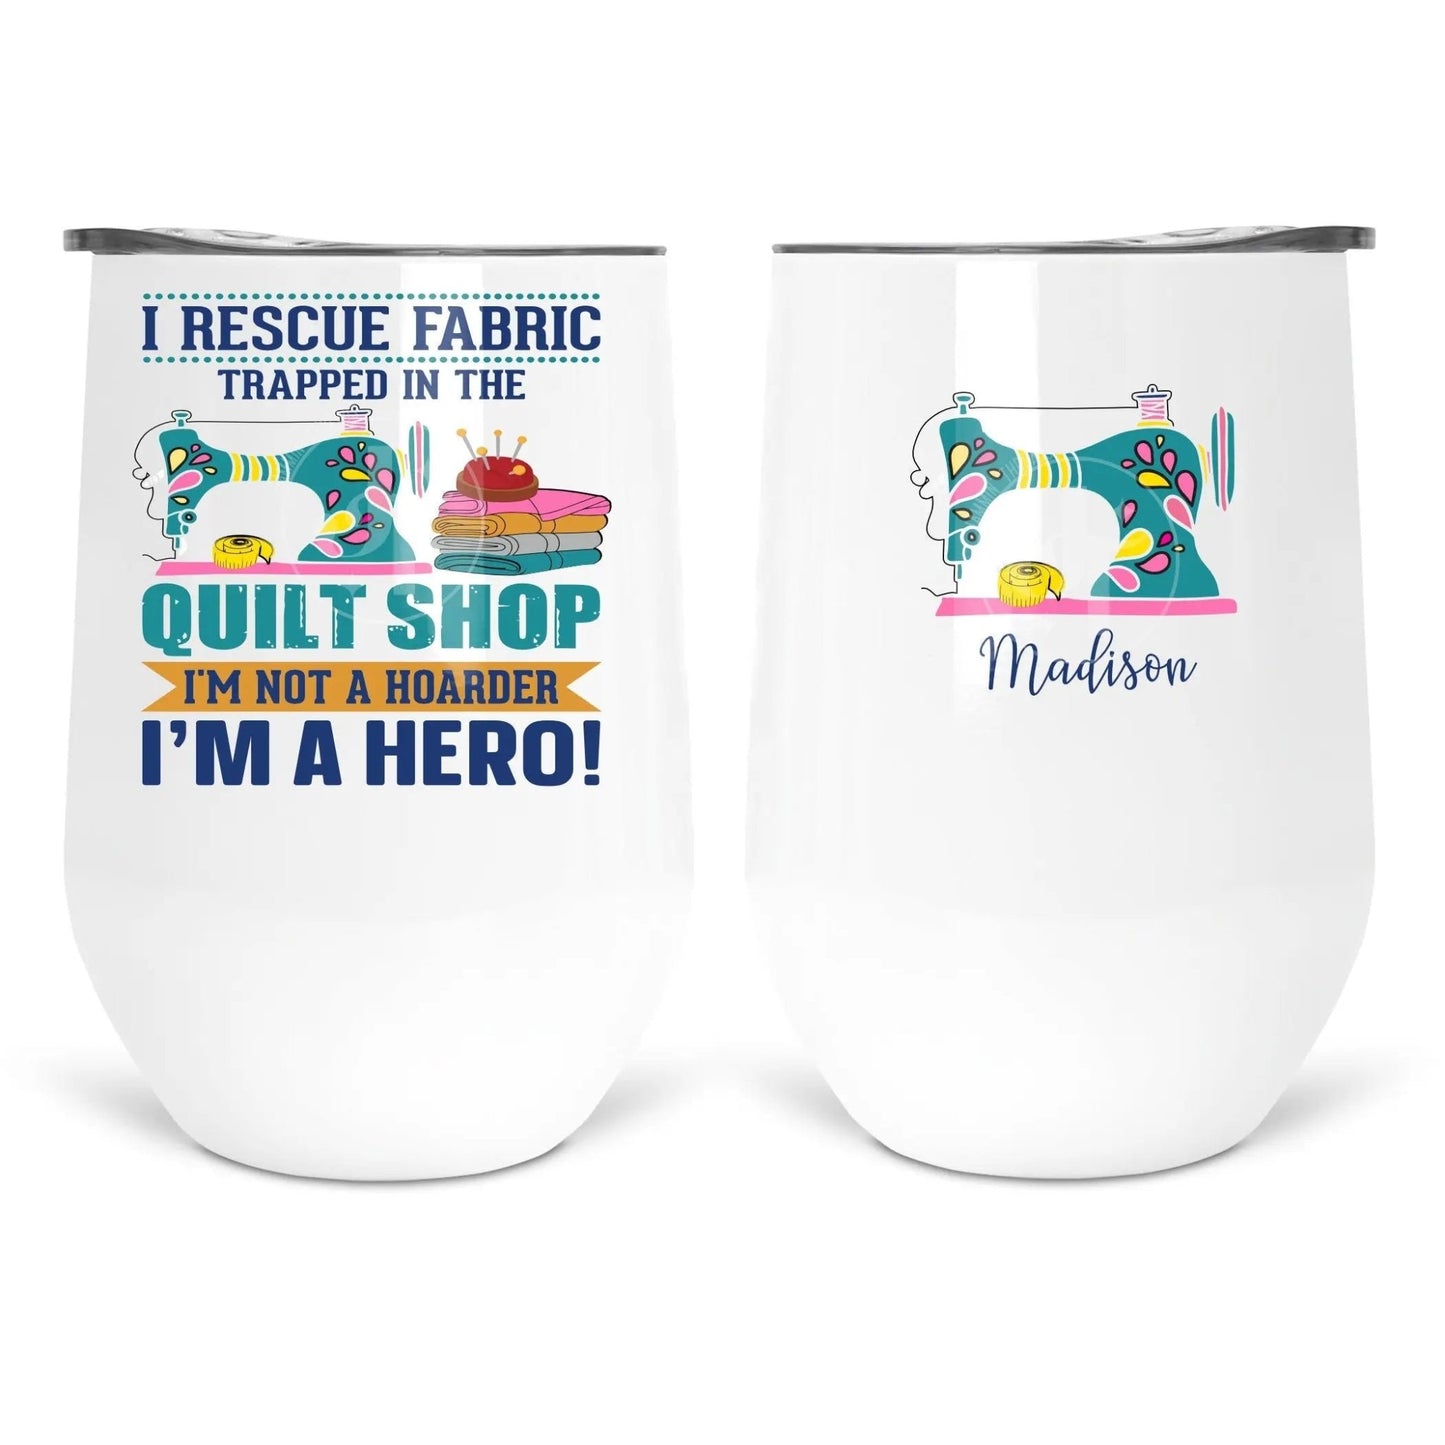 I Rescue Fabric  Trapped in The Quilt Shop. I'm Not A Hoarder, I'm a Hero!  Funny sewing and quilting mugs and tumblers - Jammin Threads